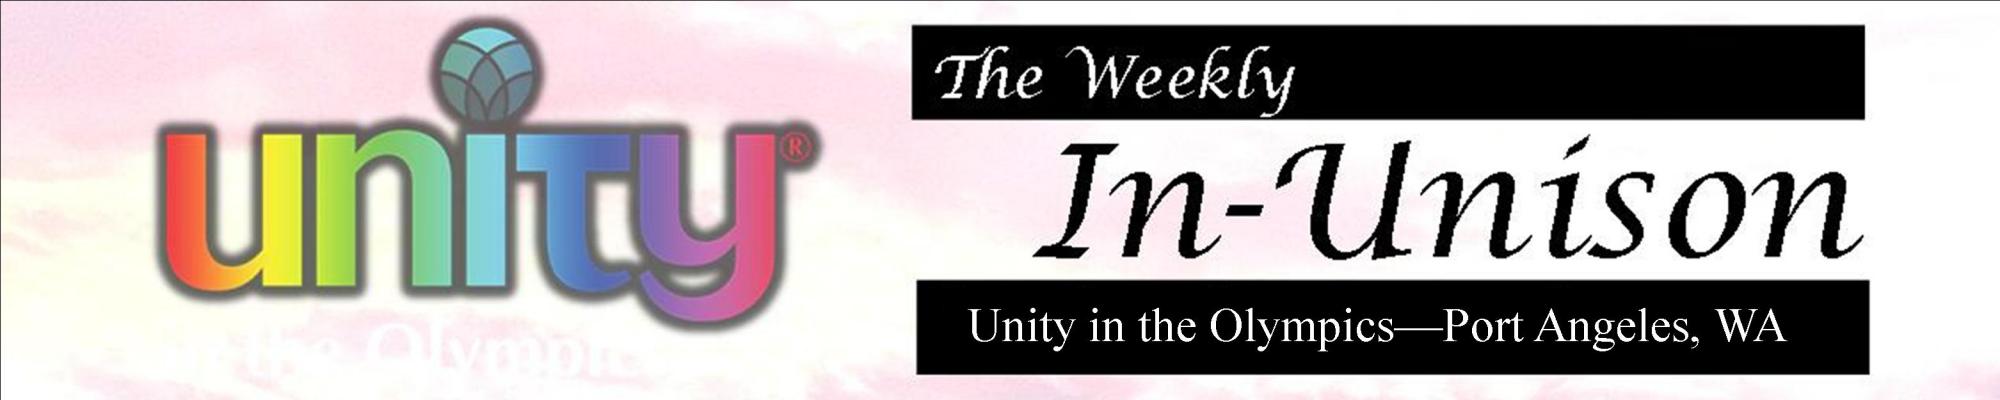 The Weekly IN-UNISON January 24th Edition